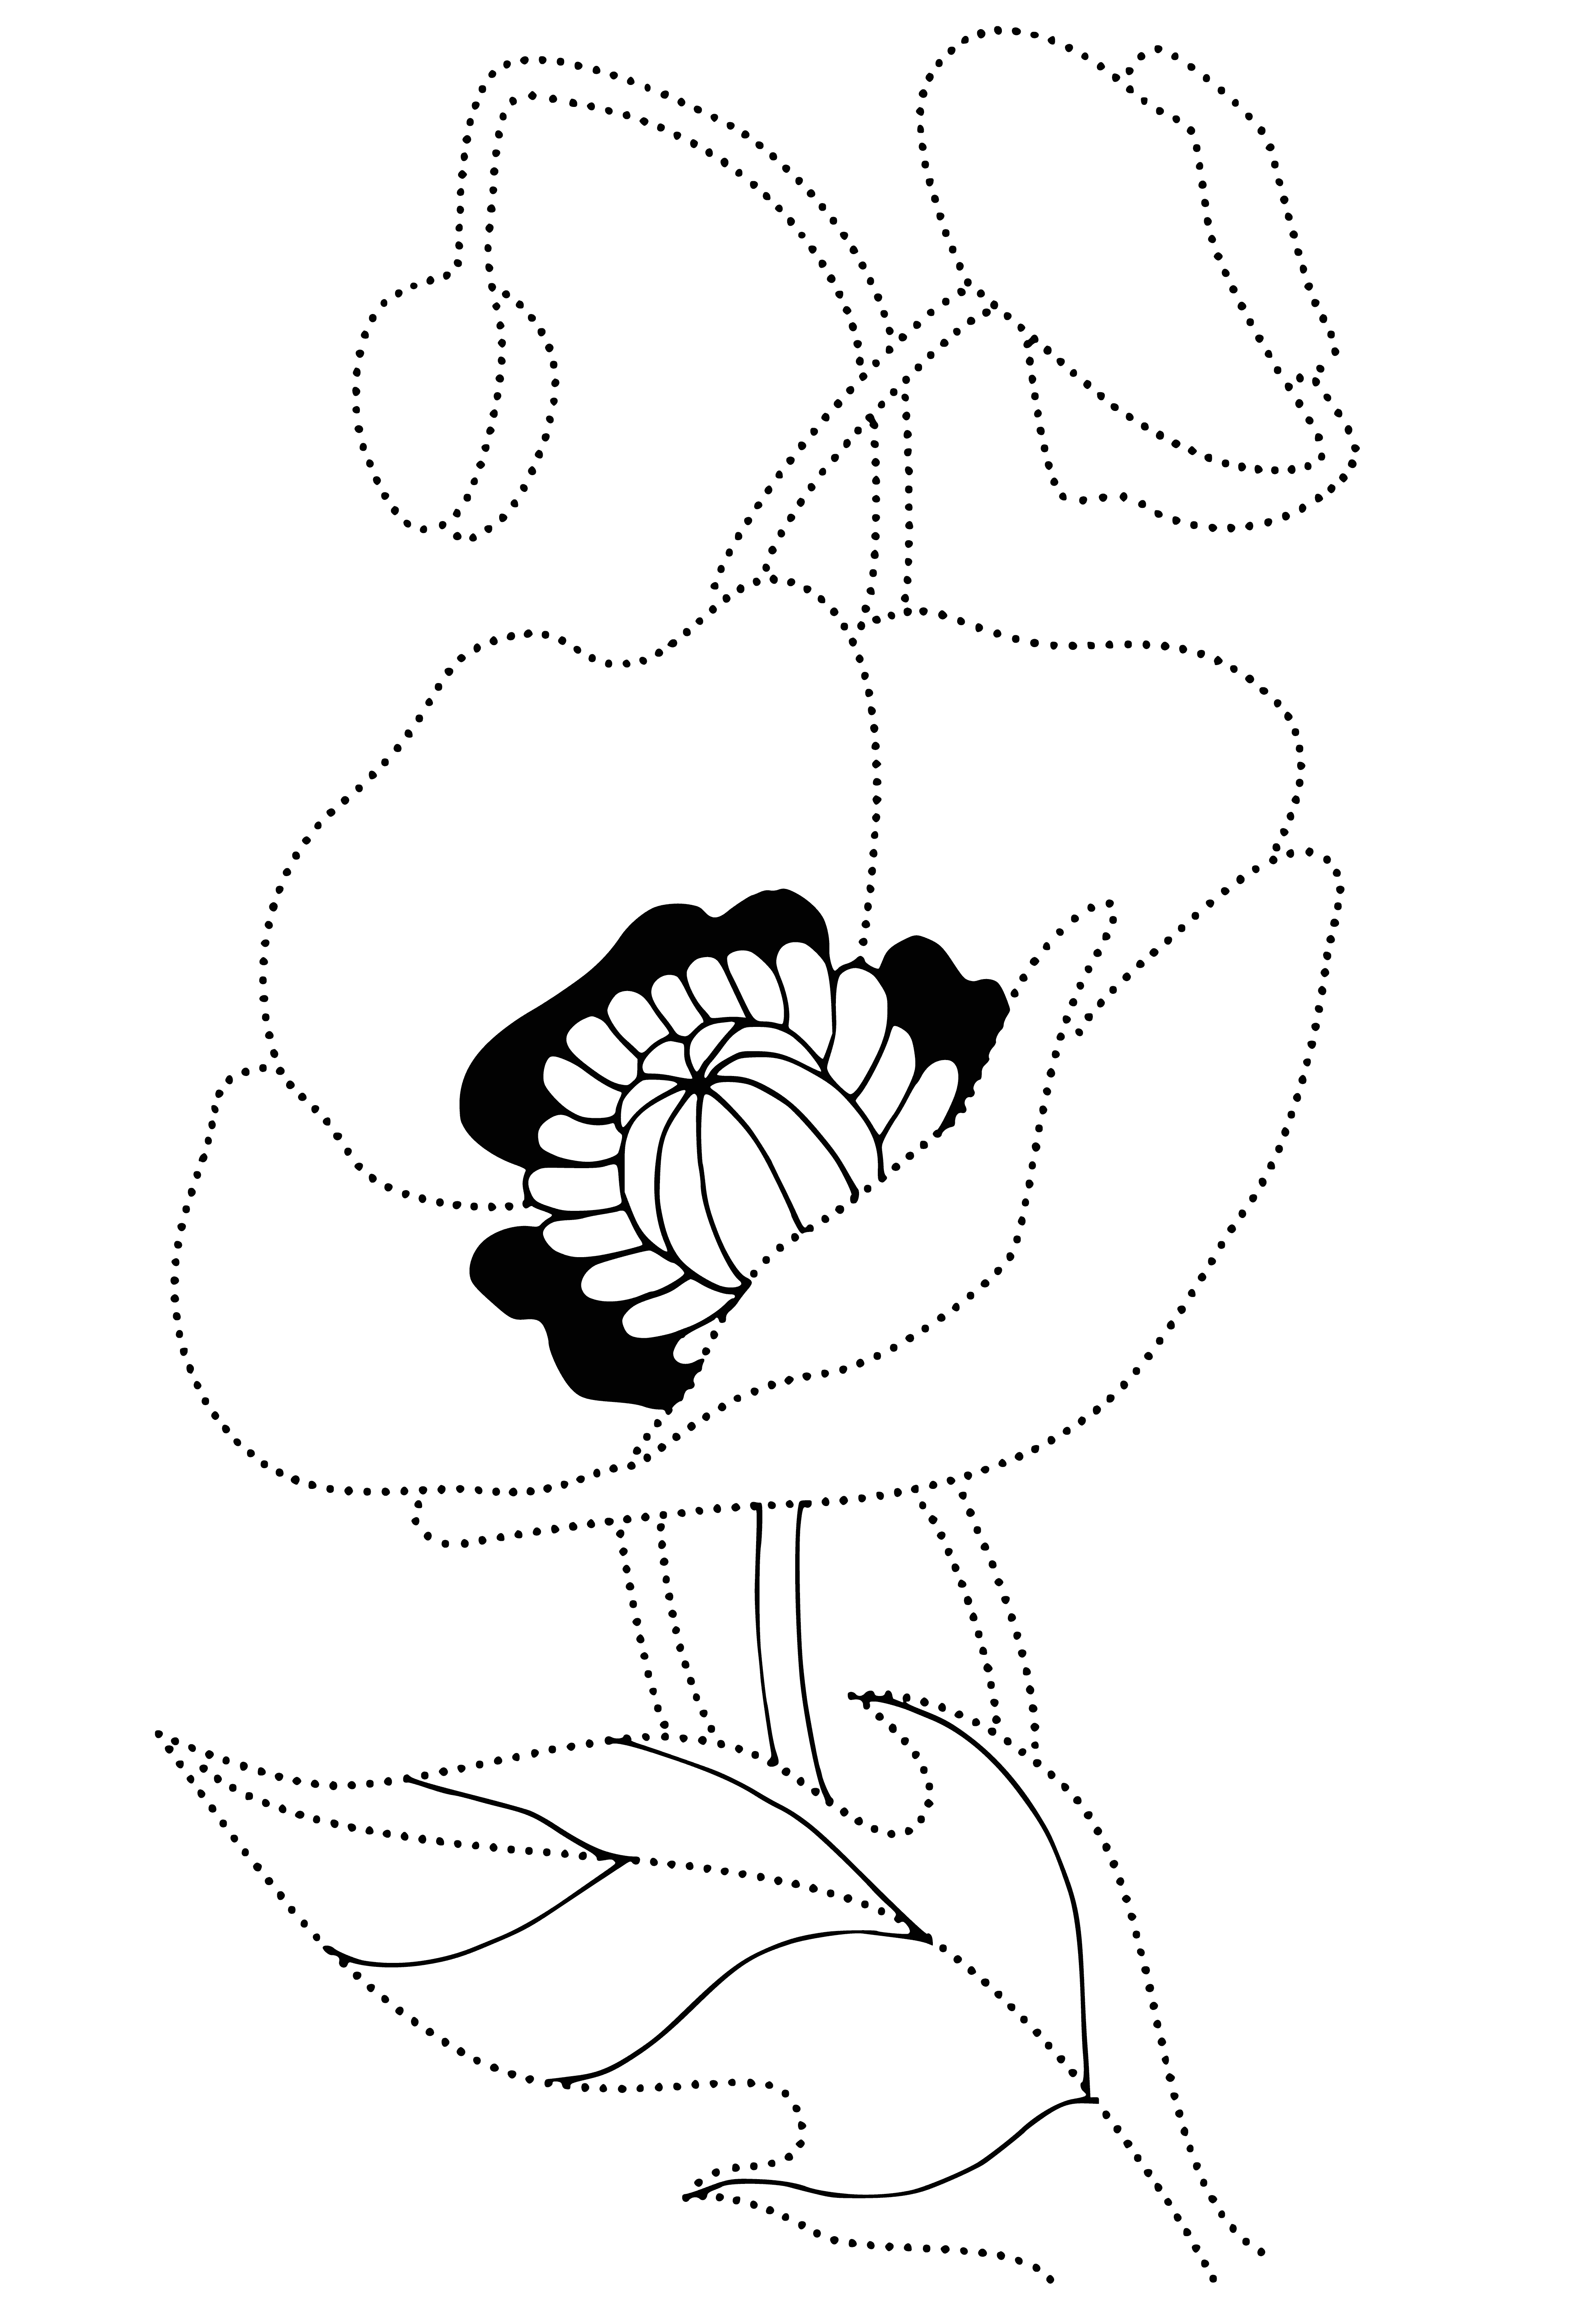 coloring page: Two types of flowers, one large and dark, small and light. Long stem on the large one and short stems on small ones. Leaves on ground.